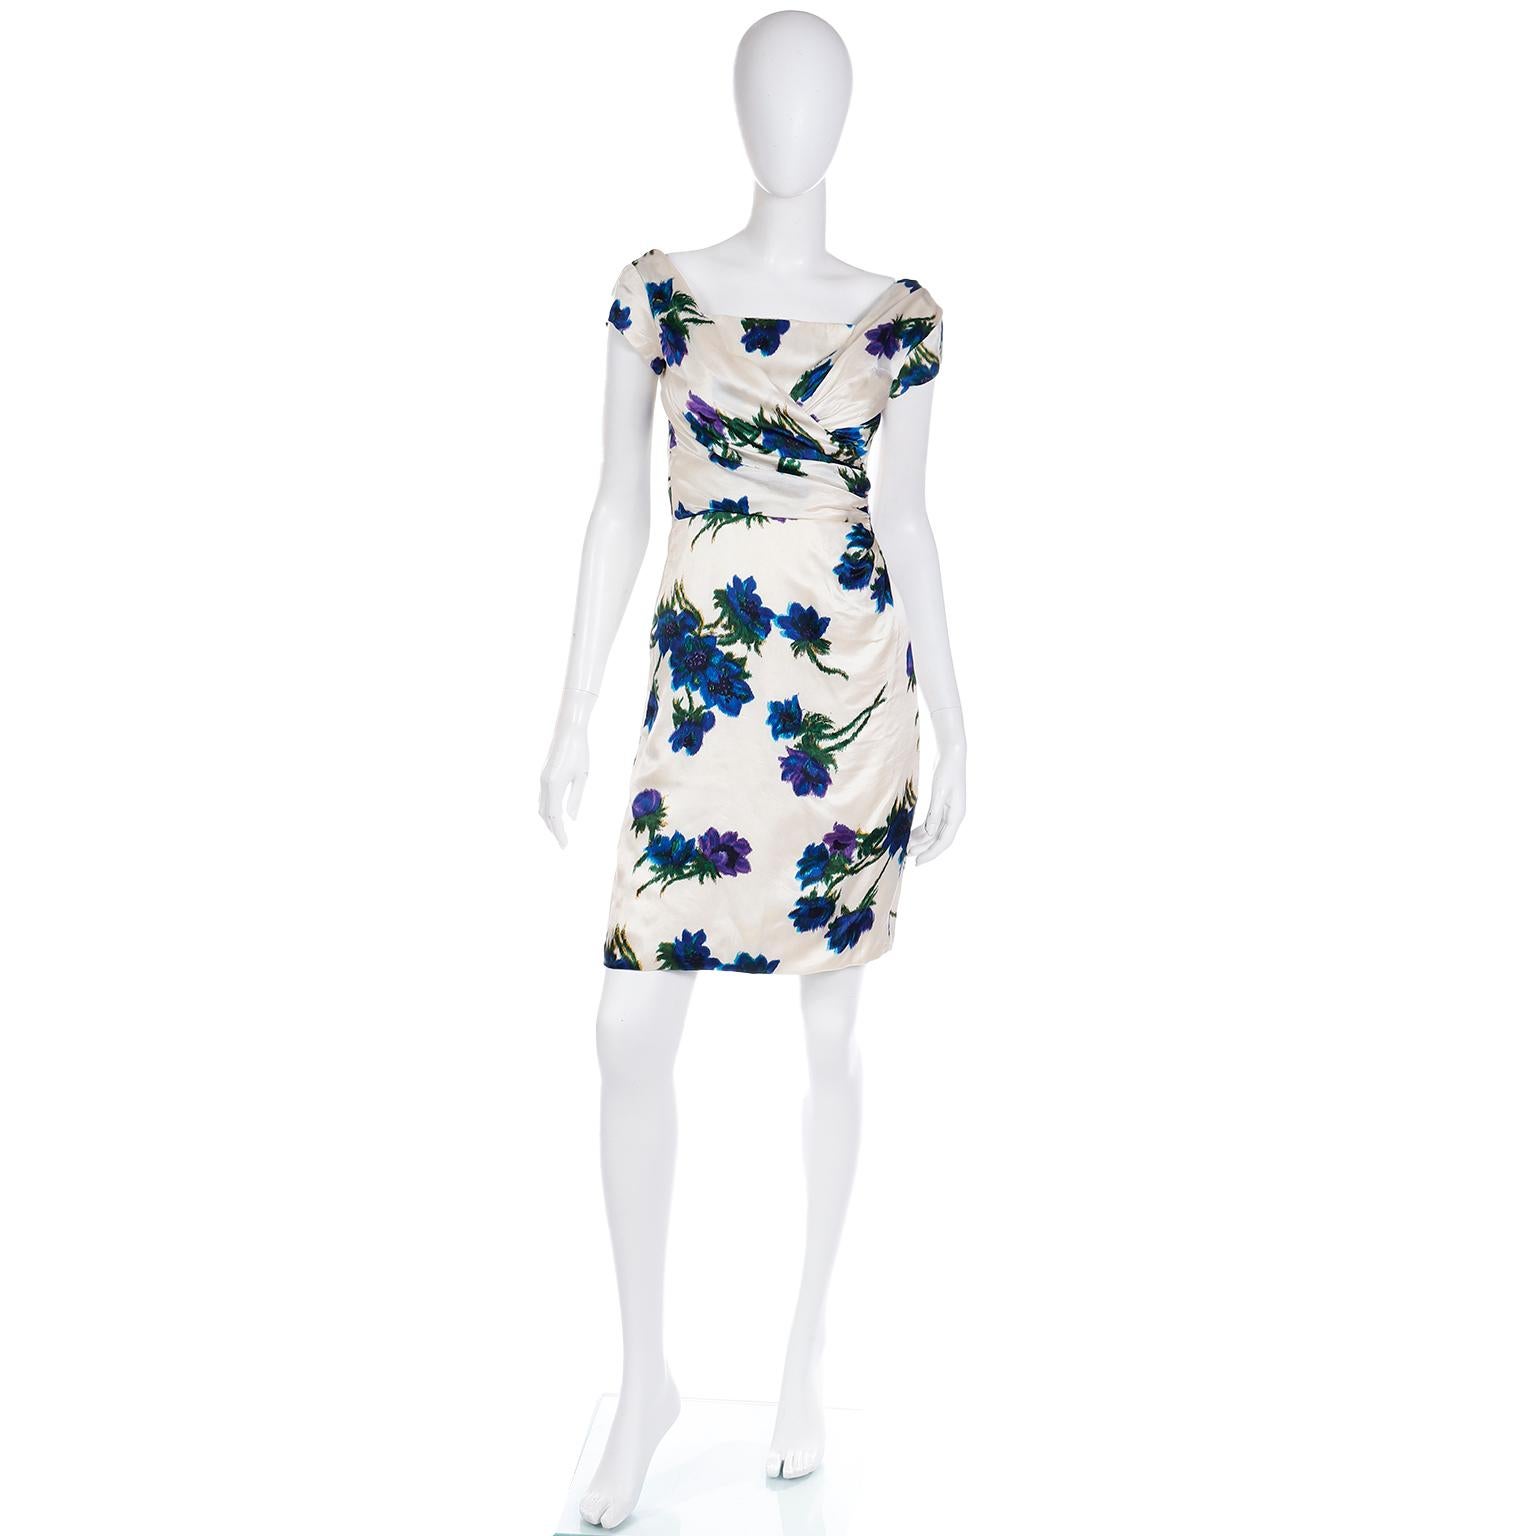 This exceptional vintage mid century dress is made from some of the finest silk we've come across! When I tell you that it feels like butter, I mean, literally that soft of a silk! The fabric is white with bold blue, purple and green floral print.